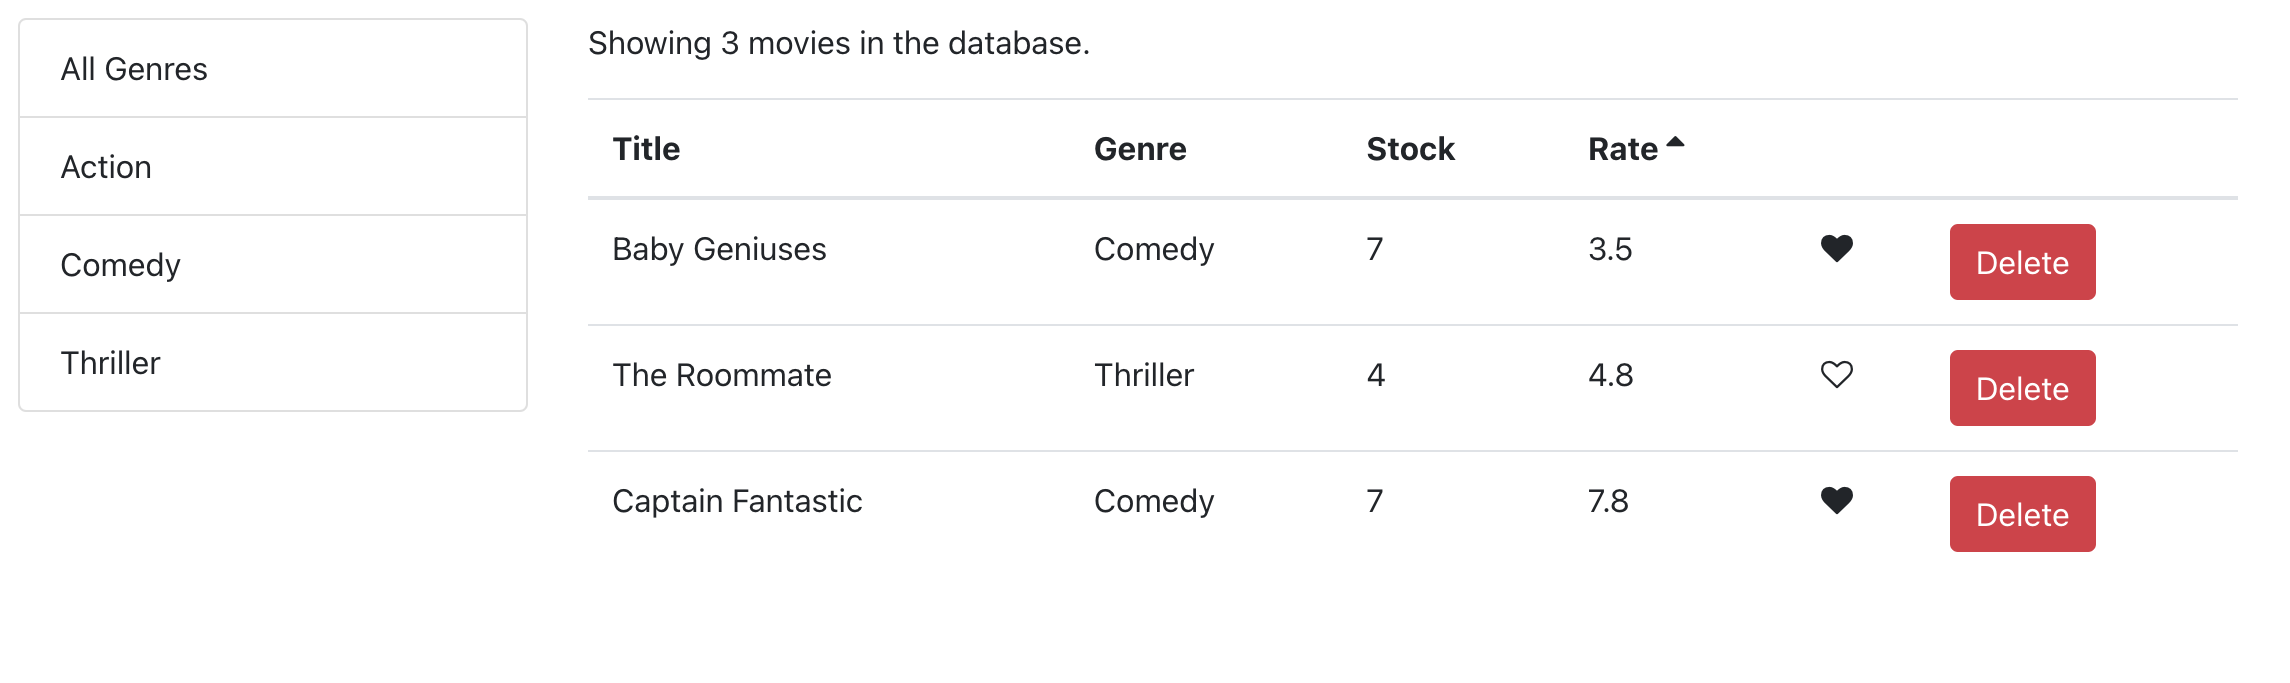 6 movies were deleted, the list was sorted by rate and 2 movies were liked